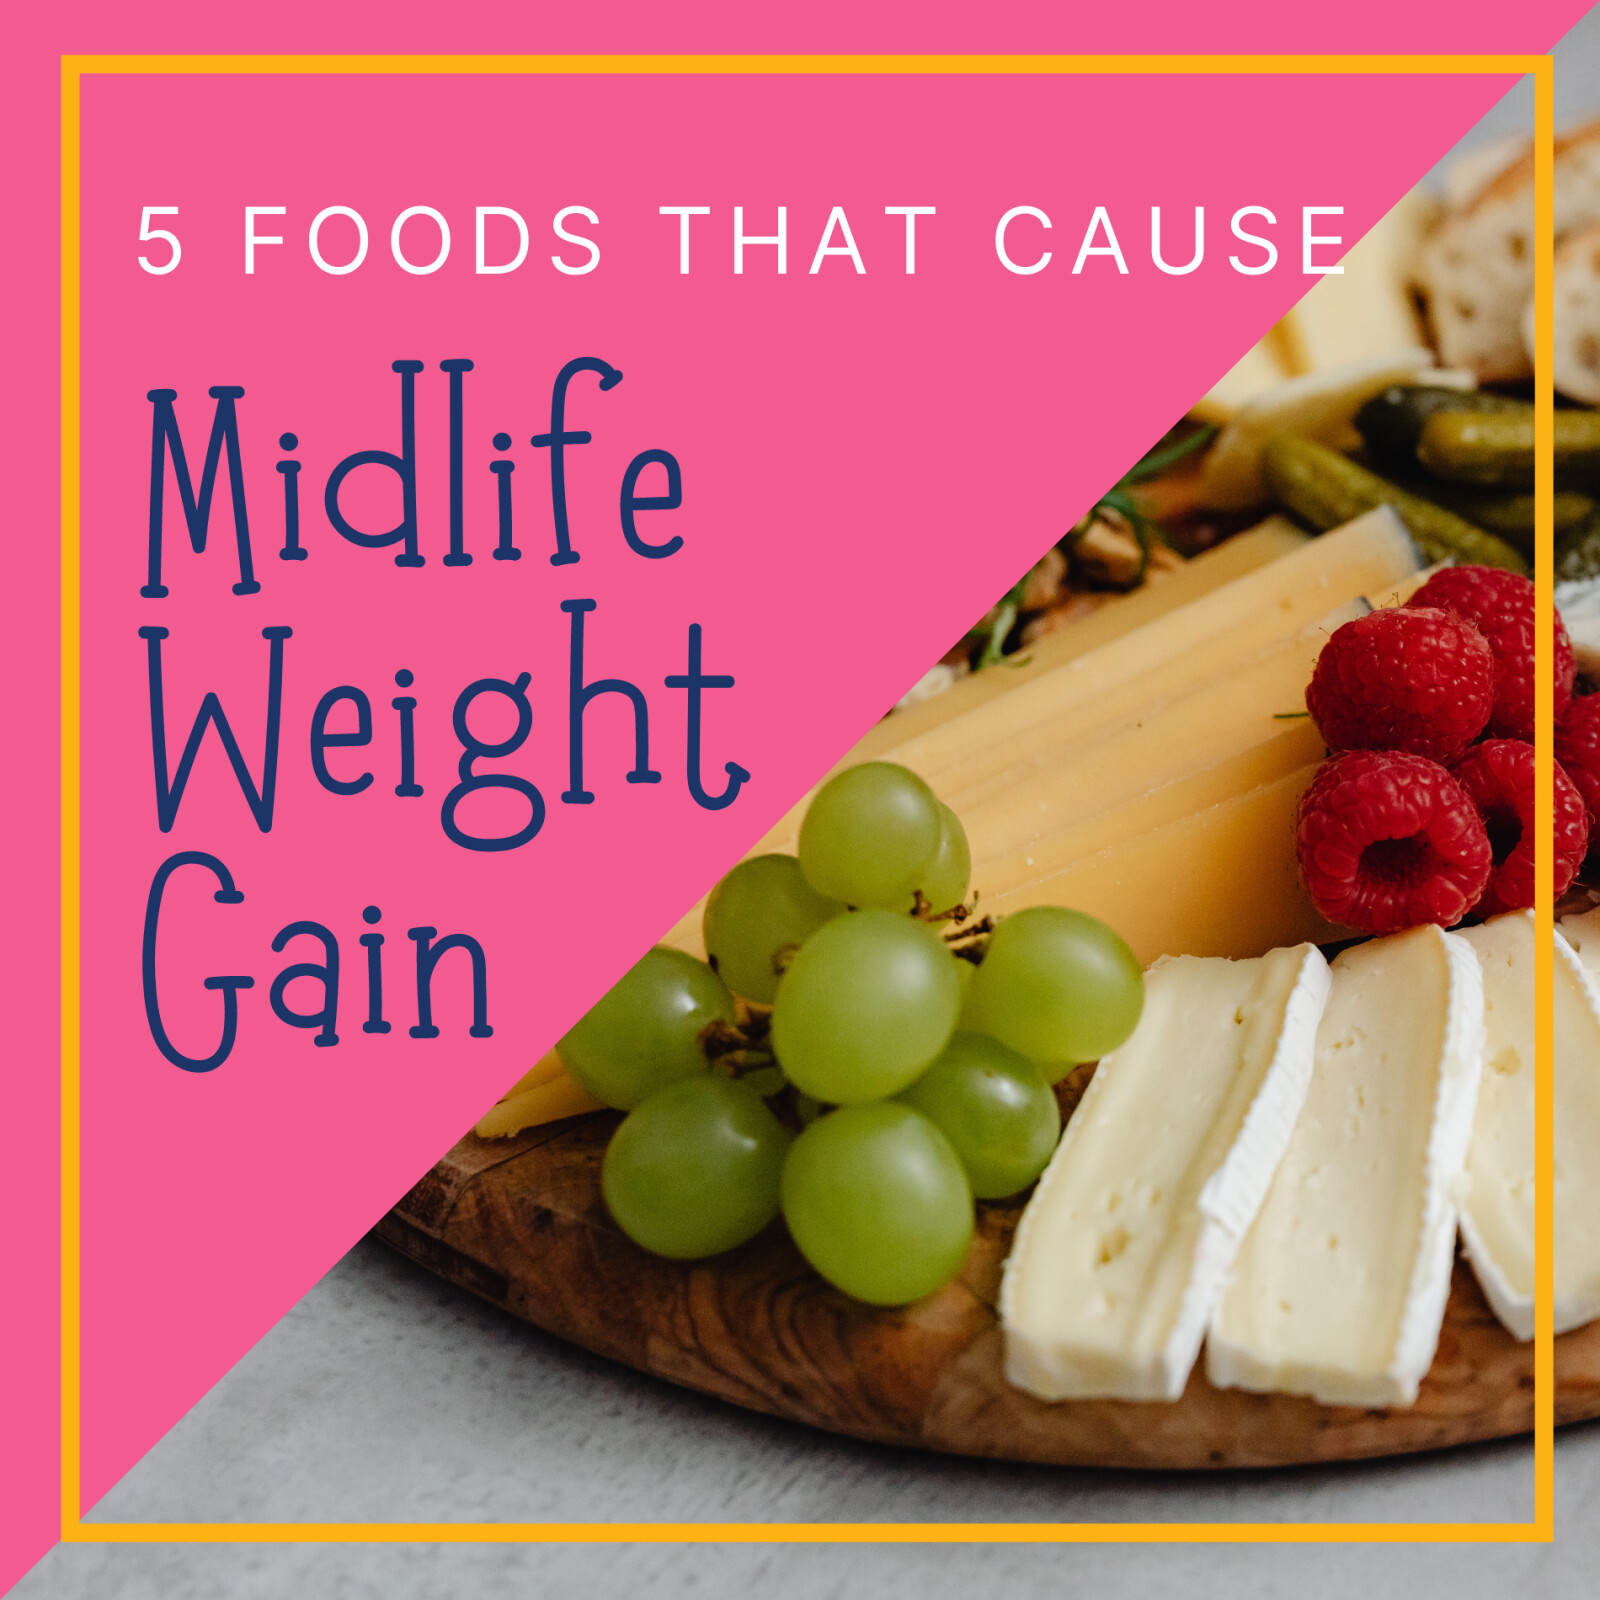 5 Foods That Cause Midlife Weight Gain